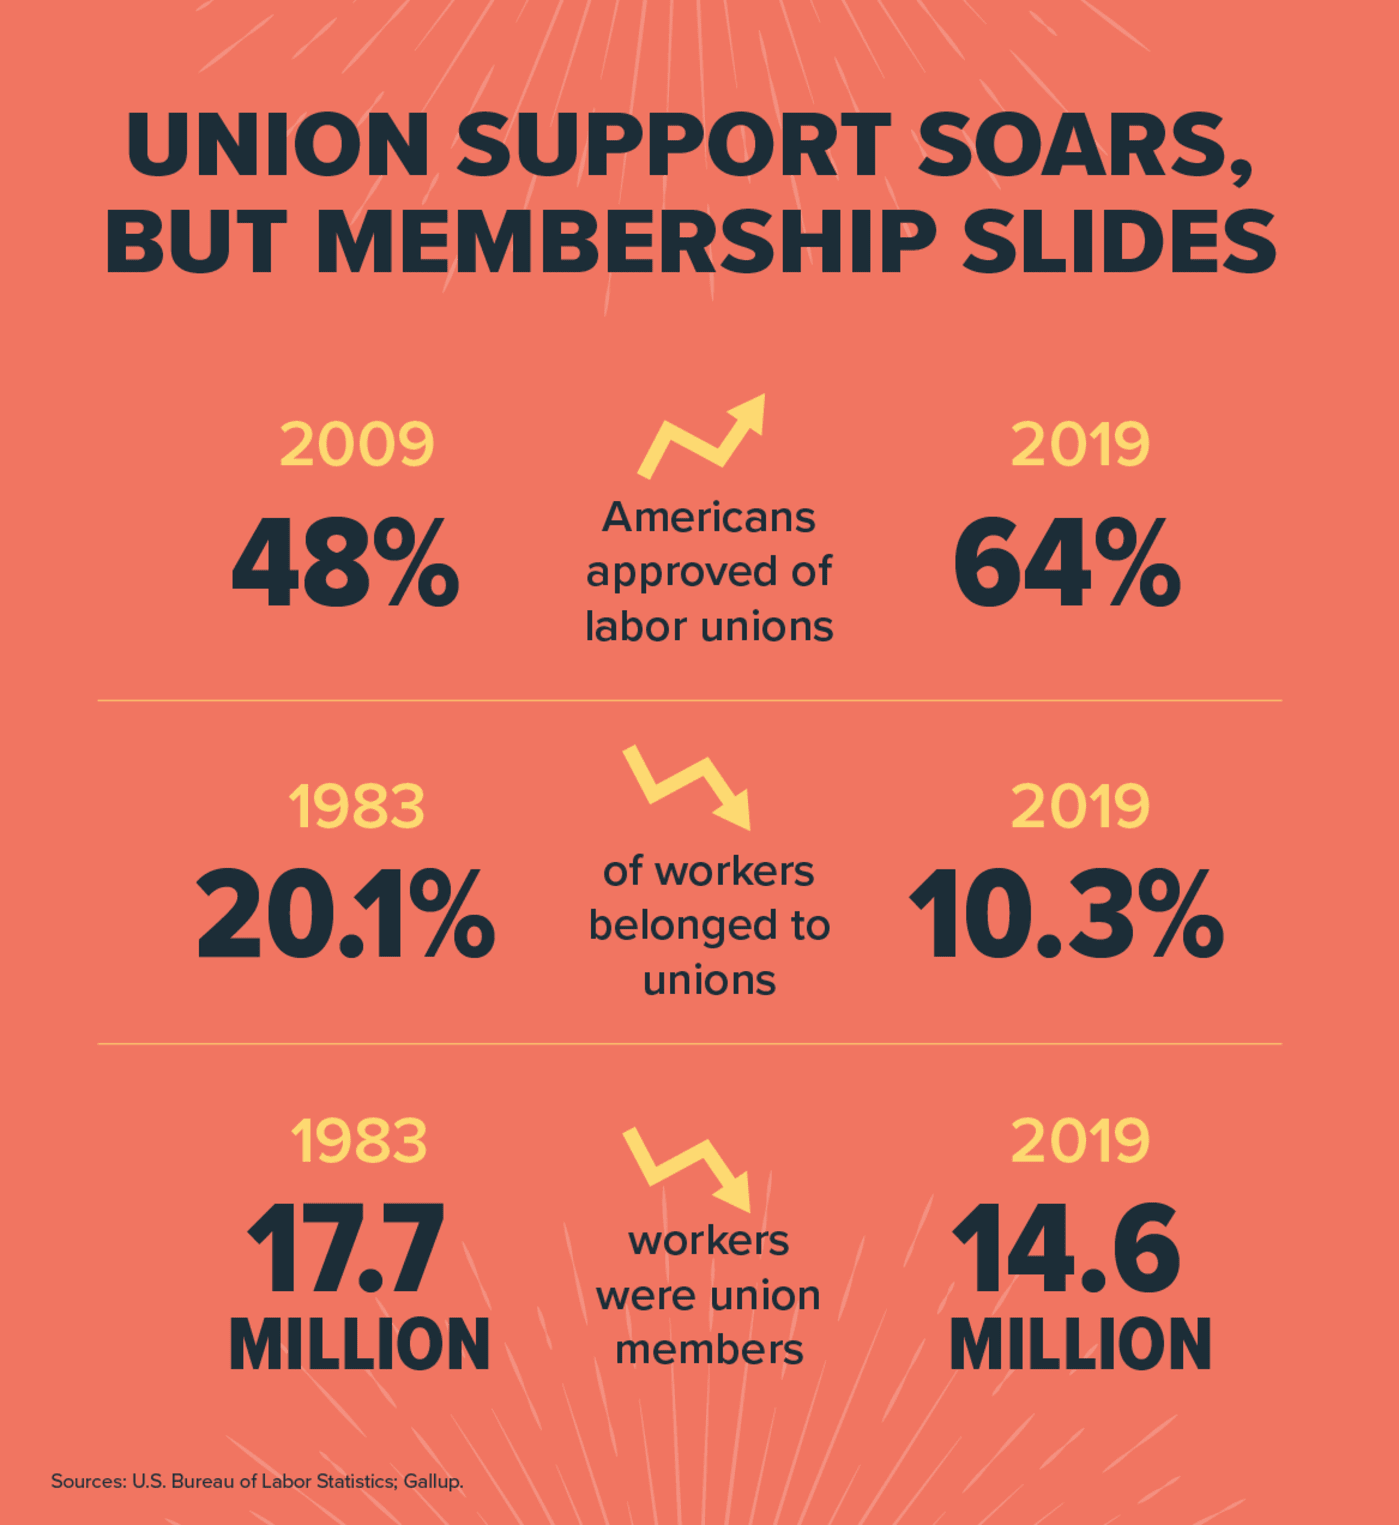 Union Support Soars, but Membership Slides